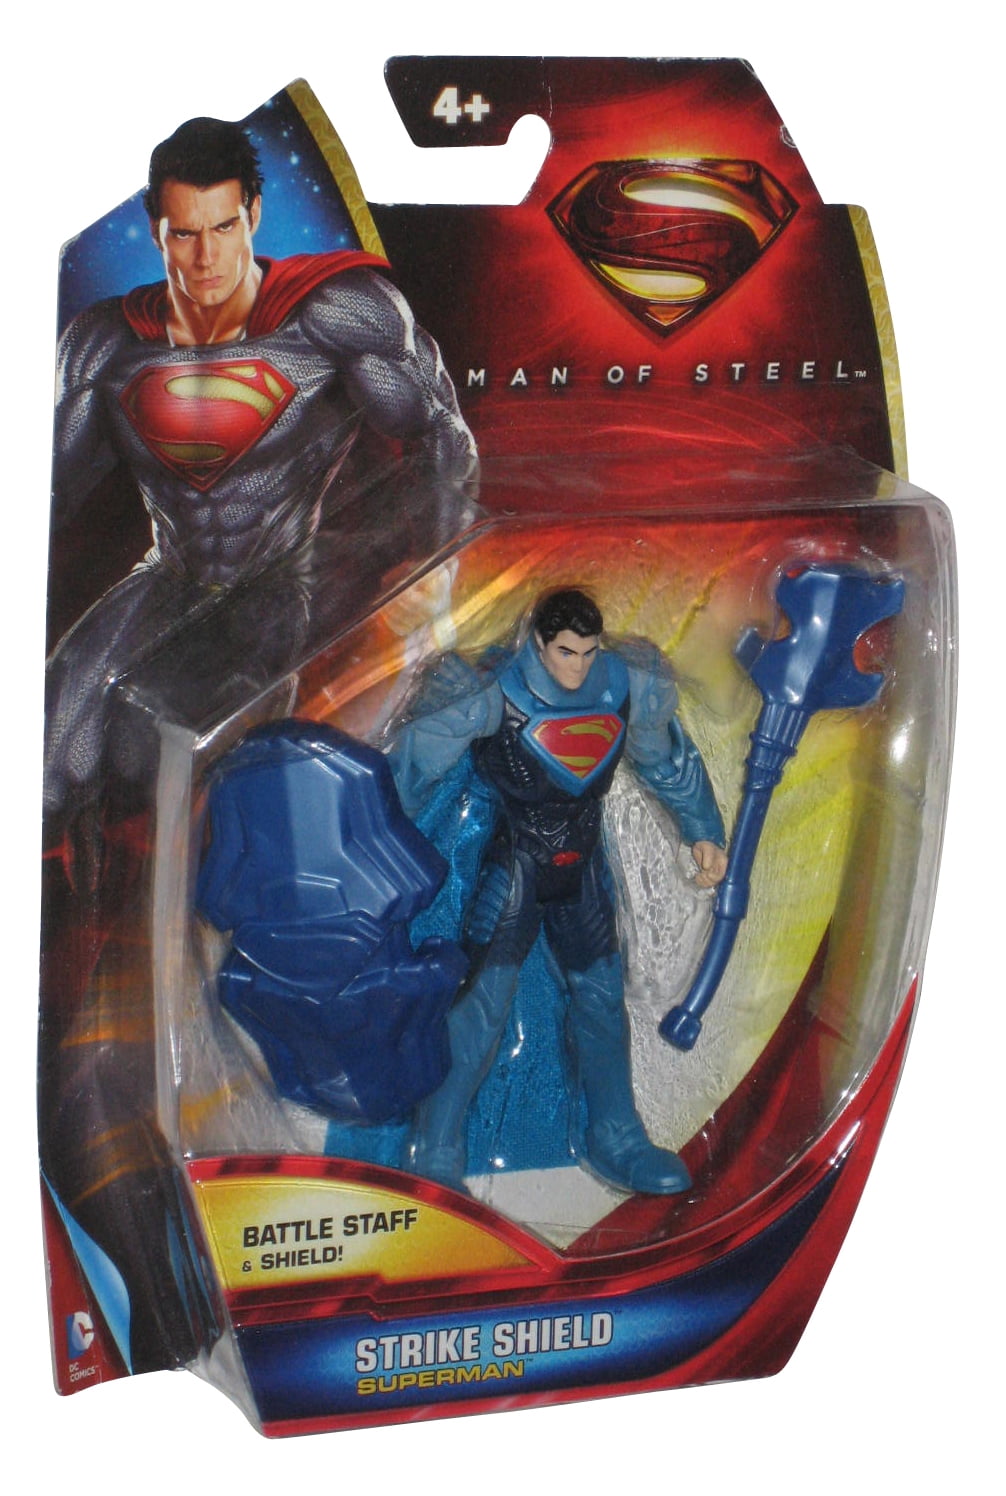 Superman Man of Steel Quick Shots Launch & Attack Battle Pack 2013 for sale online 